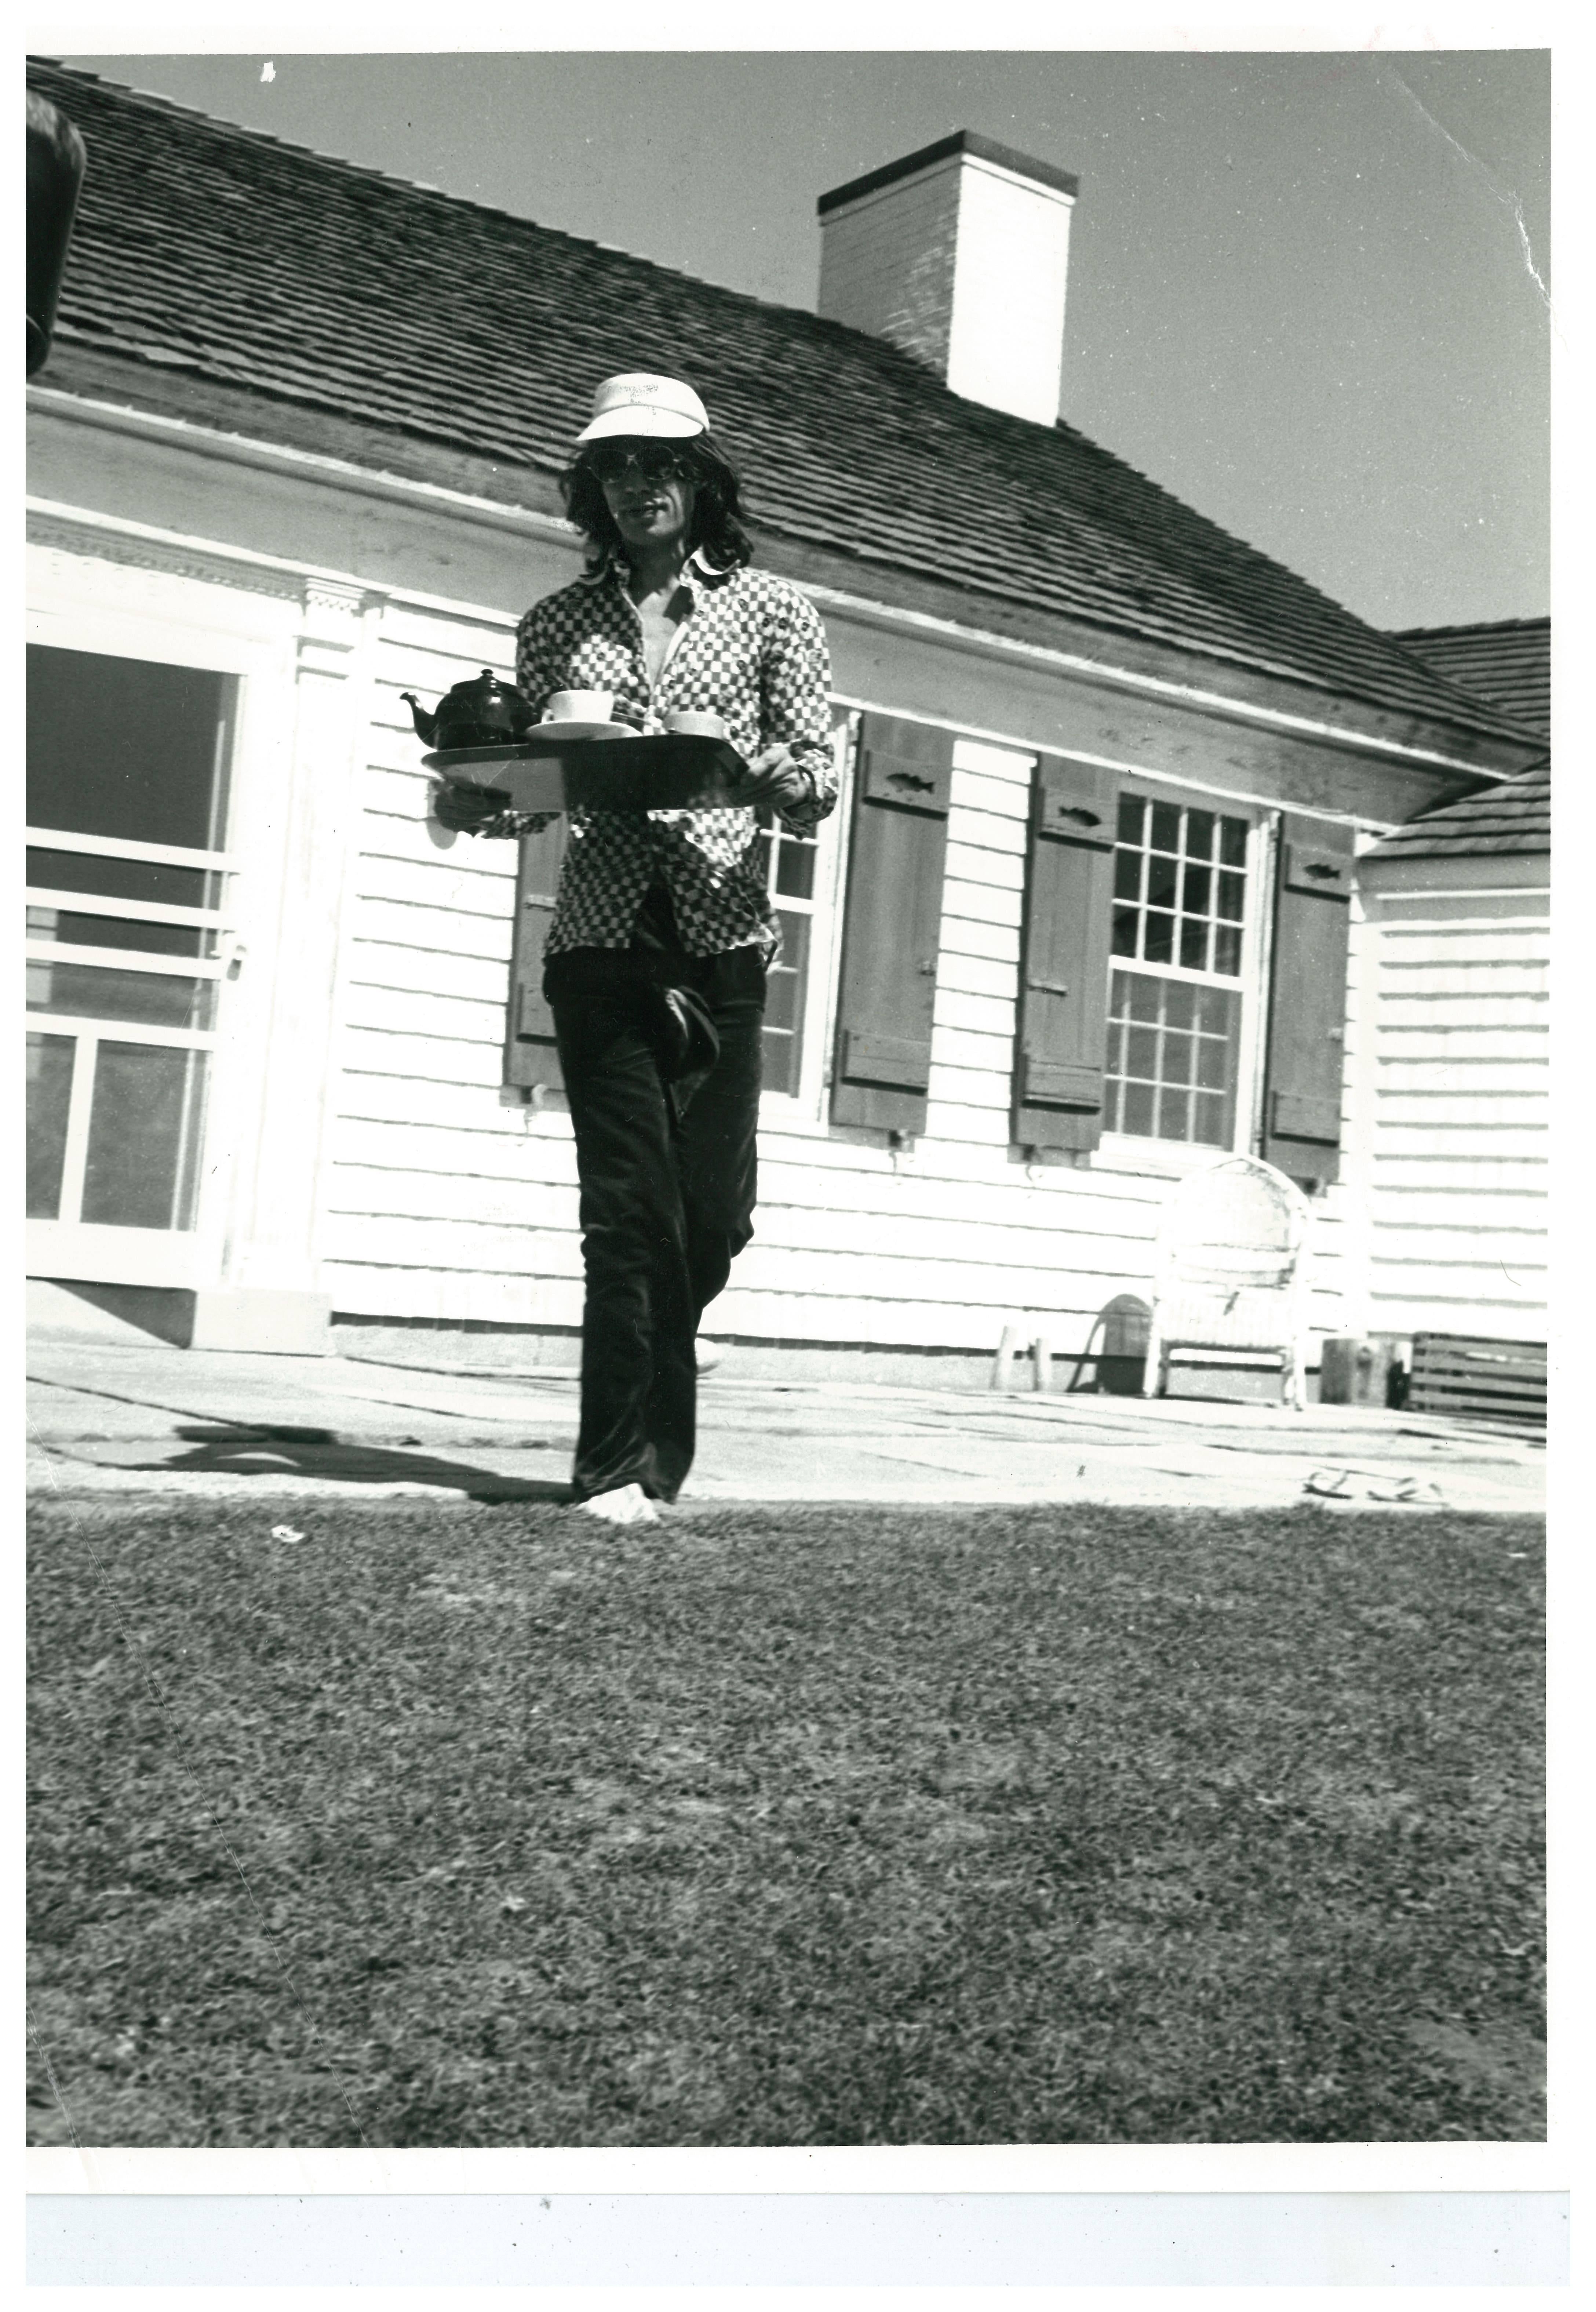 Andy Warhol Black and White Photograph - Mick Jagger Serving Tea at Warhol's Montauk Estate (UNIQUE)